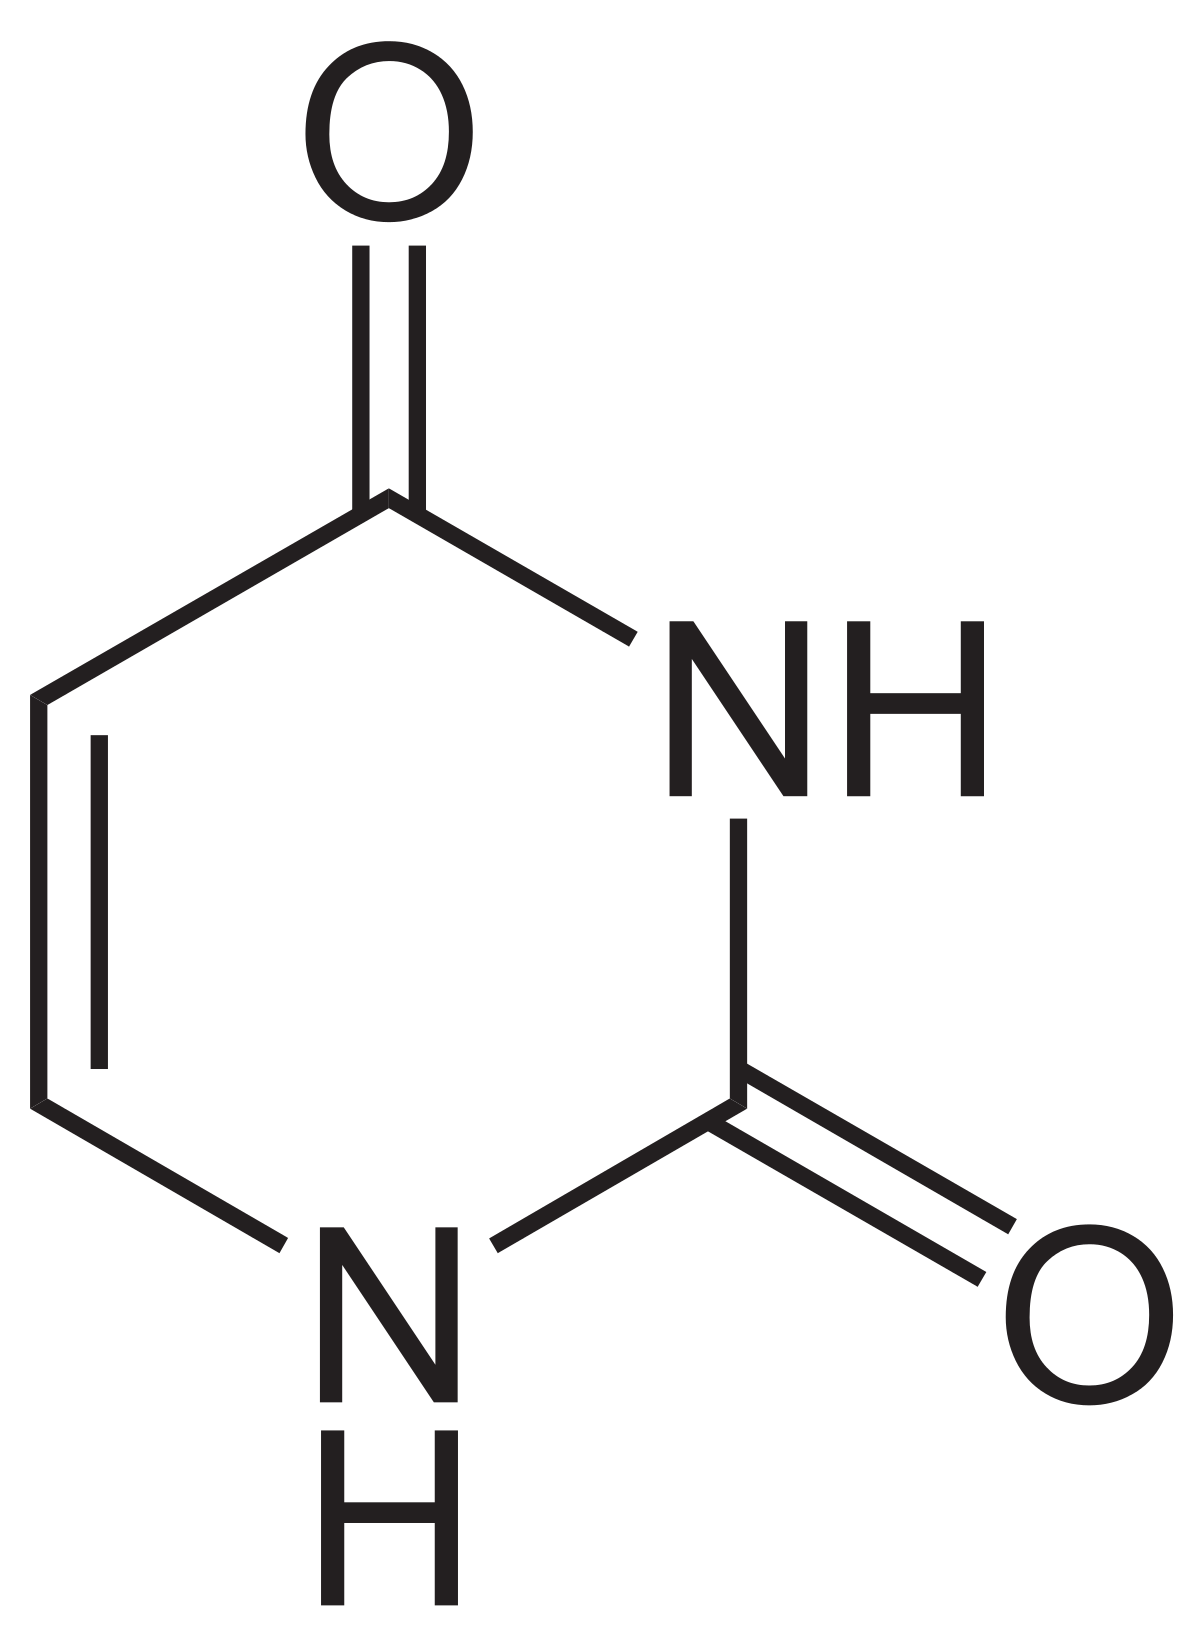 The chemical structure of uracil, showing its single-ring pyrimidine structure